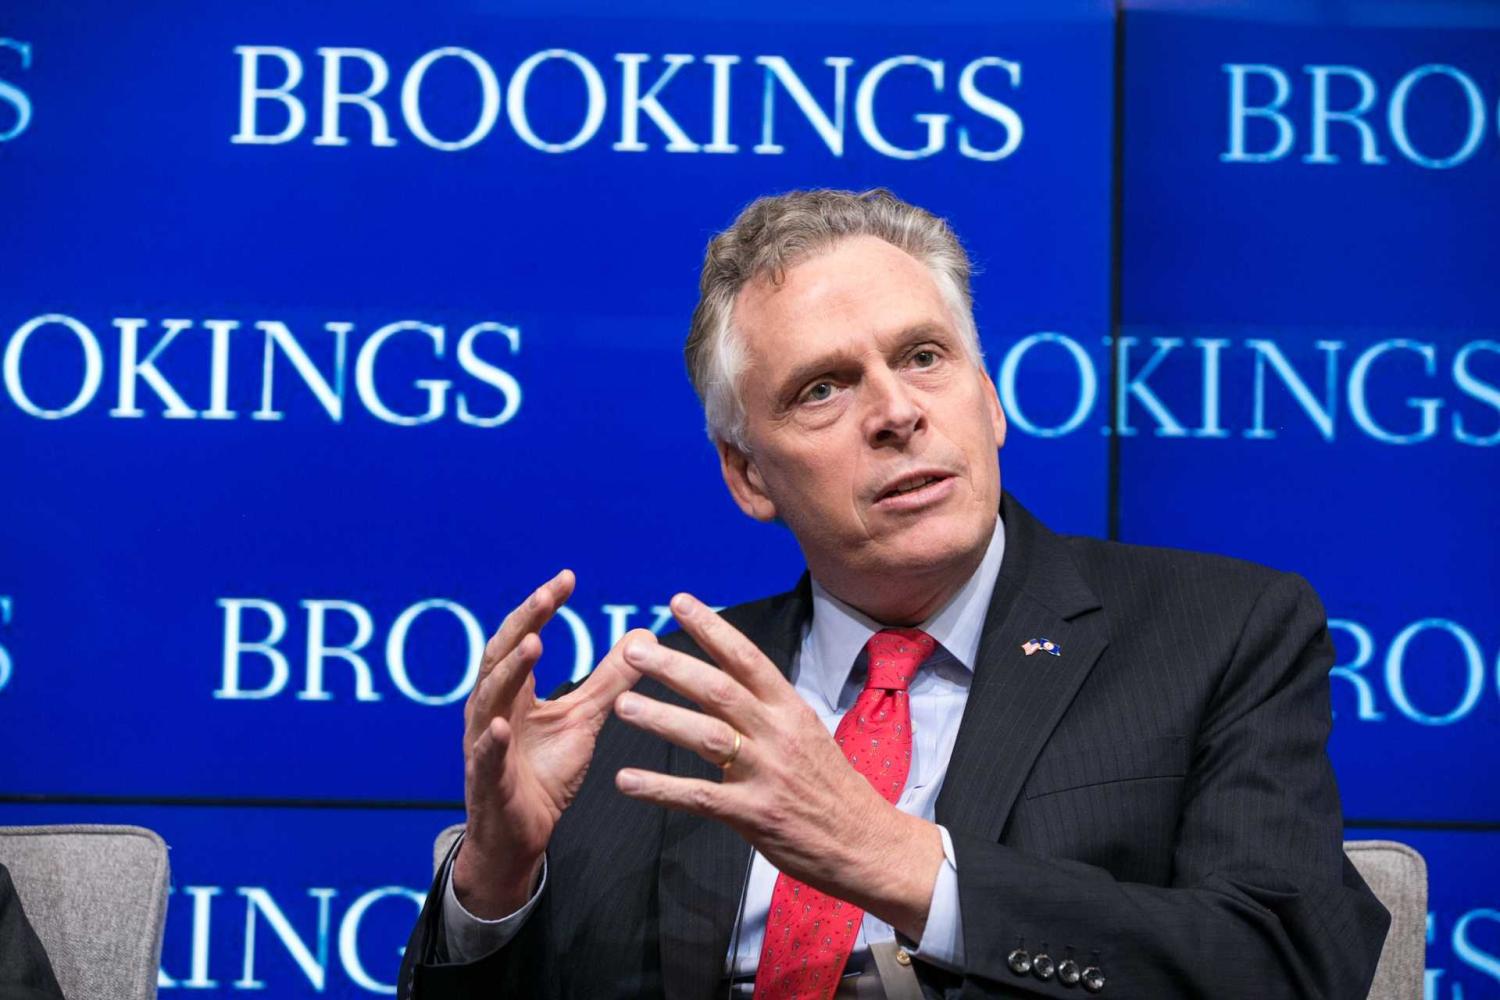 Gov. Terry McAuliffe on Charlottesville, race relations in Virgina, and criminal justice reform